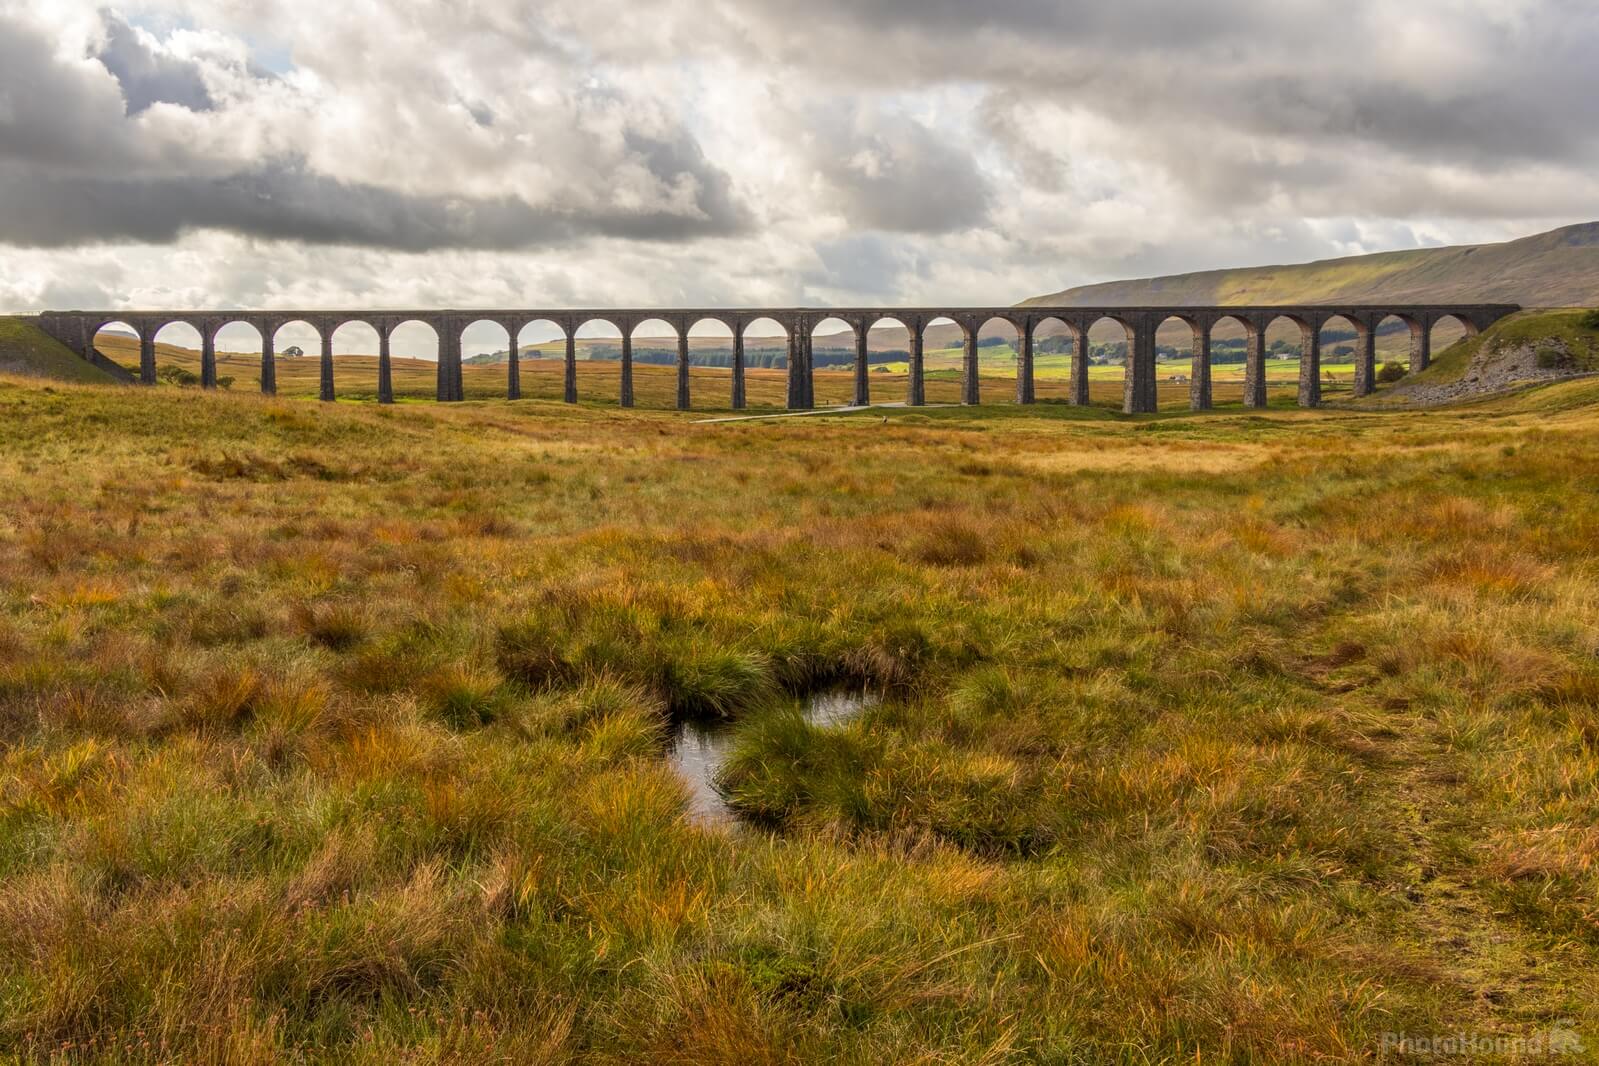 Image of Ribblehead Viaduct, Ribblesdale by Andy Killingbeck